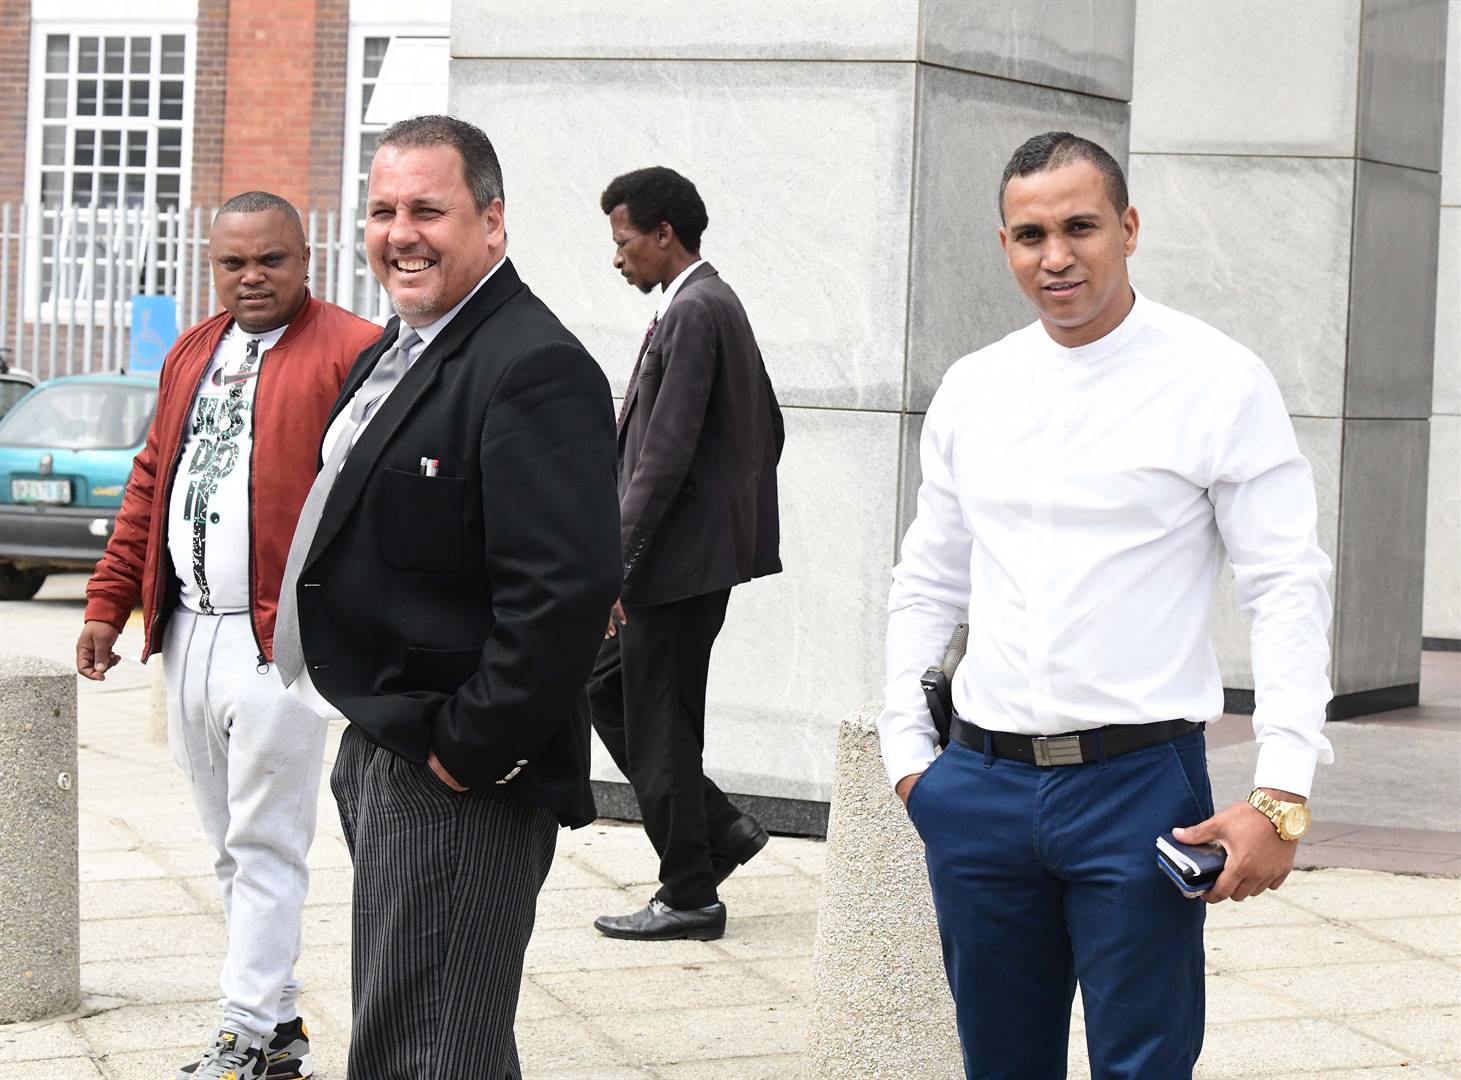 Warrant Officer Severiano Blundin (right) leaves the Gqeberha Magistrate's Court with his lawyer, advocate Jason Thysse. (Lulama Zenzile/Netwerk24)